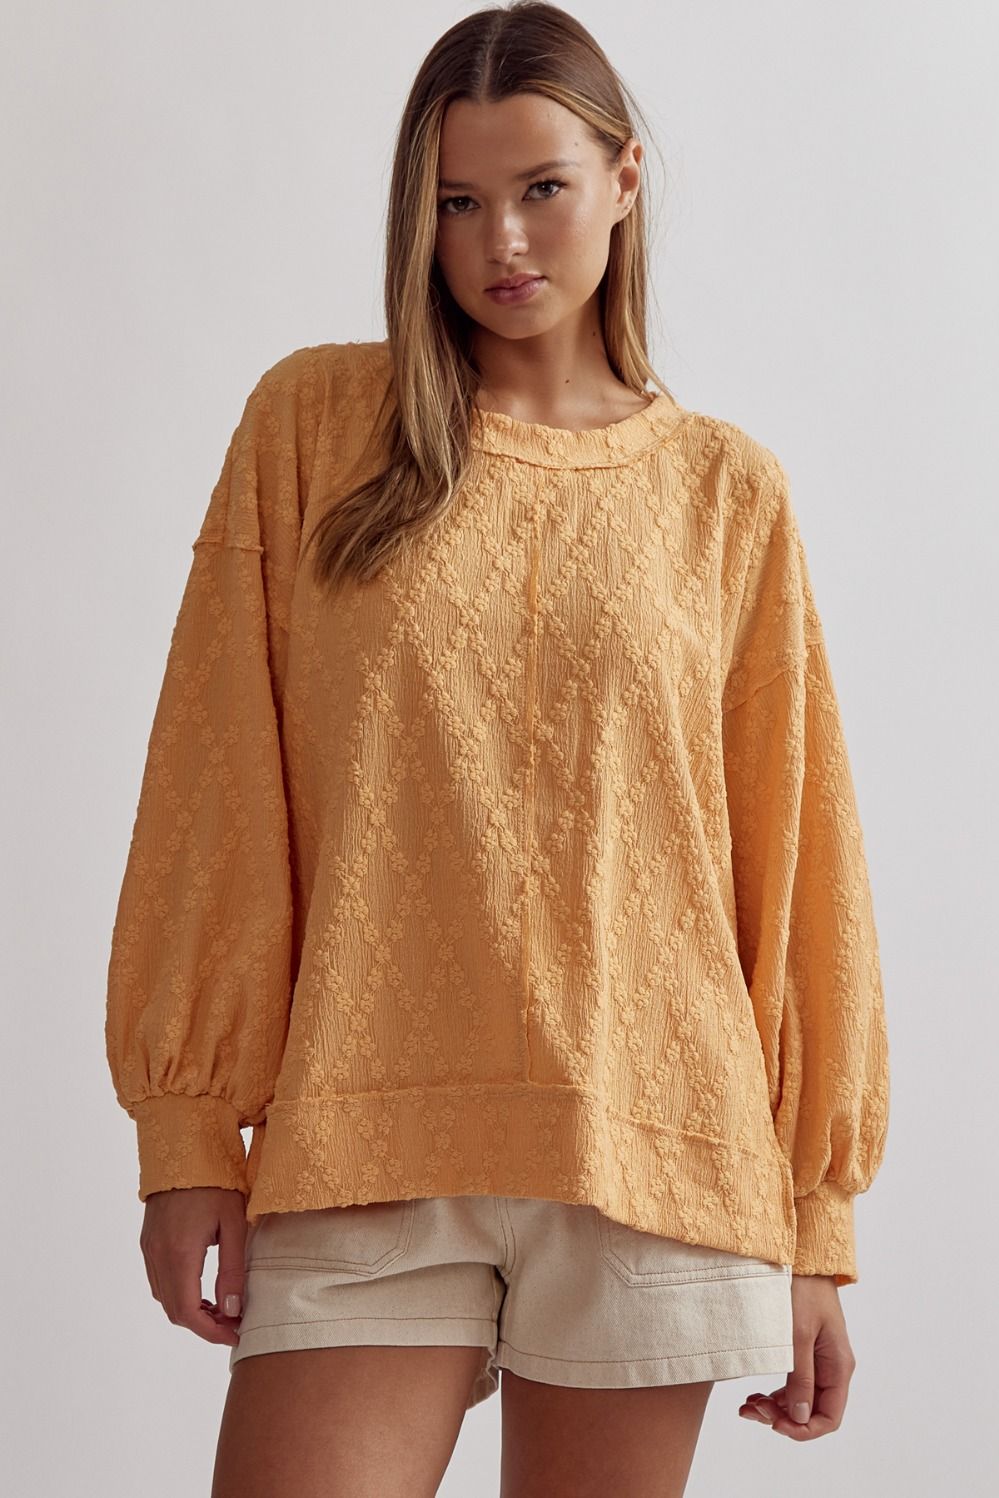 Apricot Textured Top